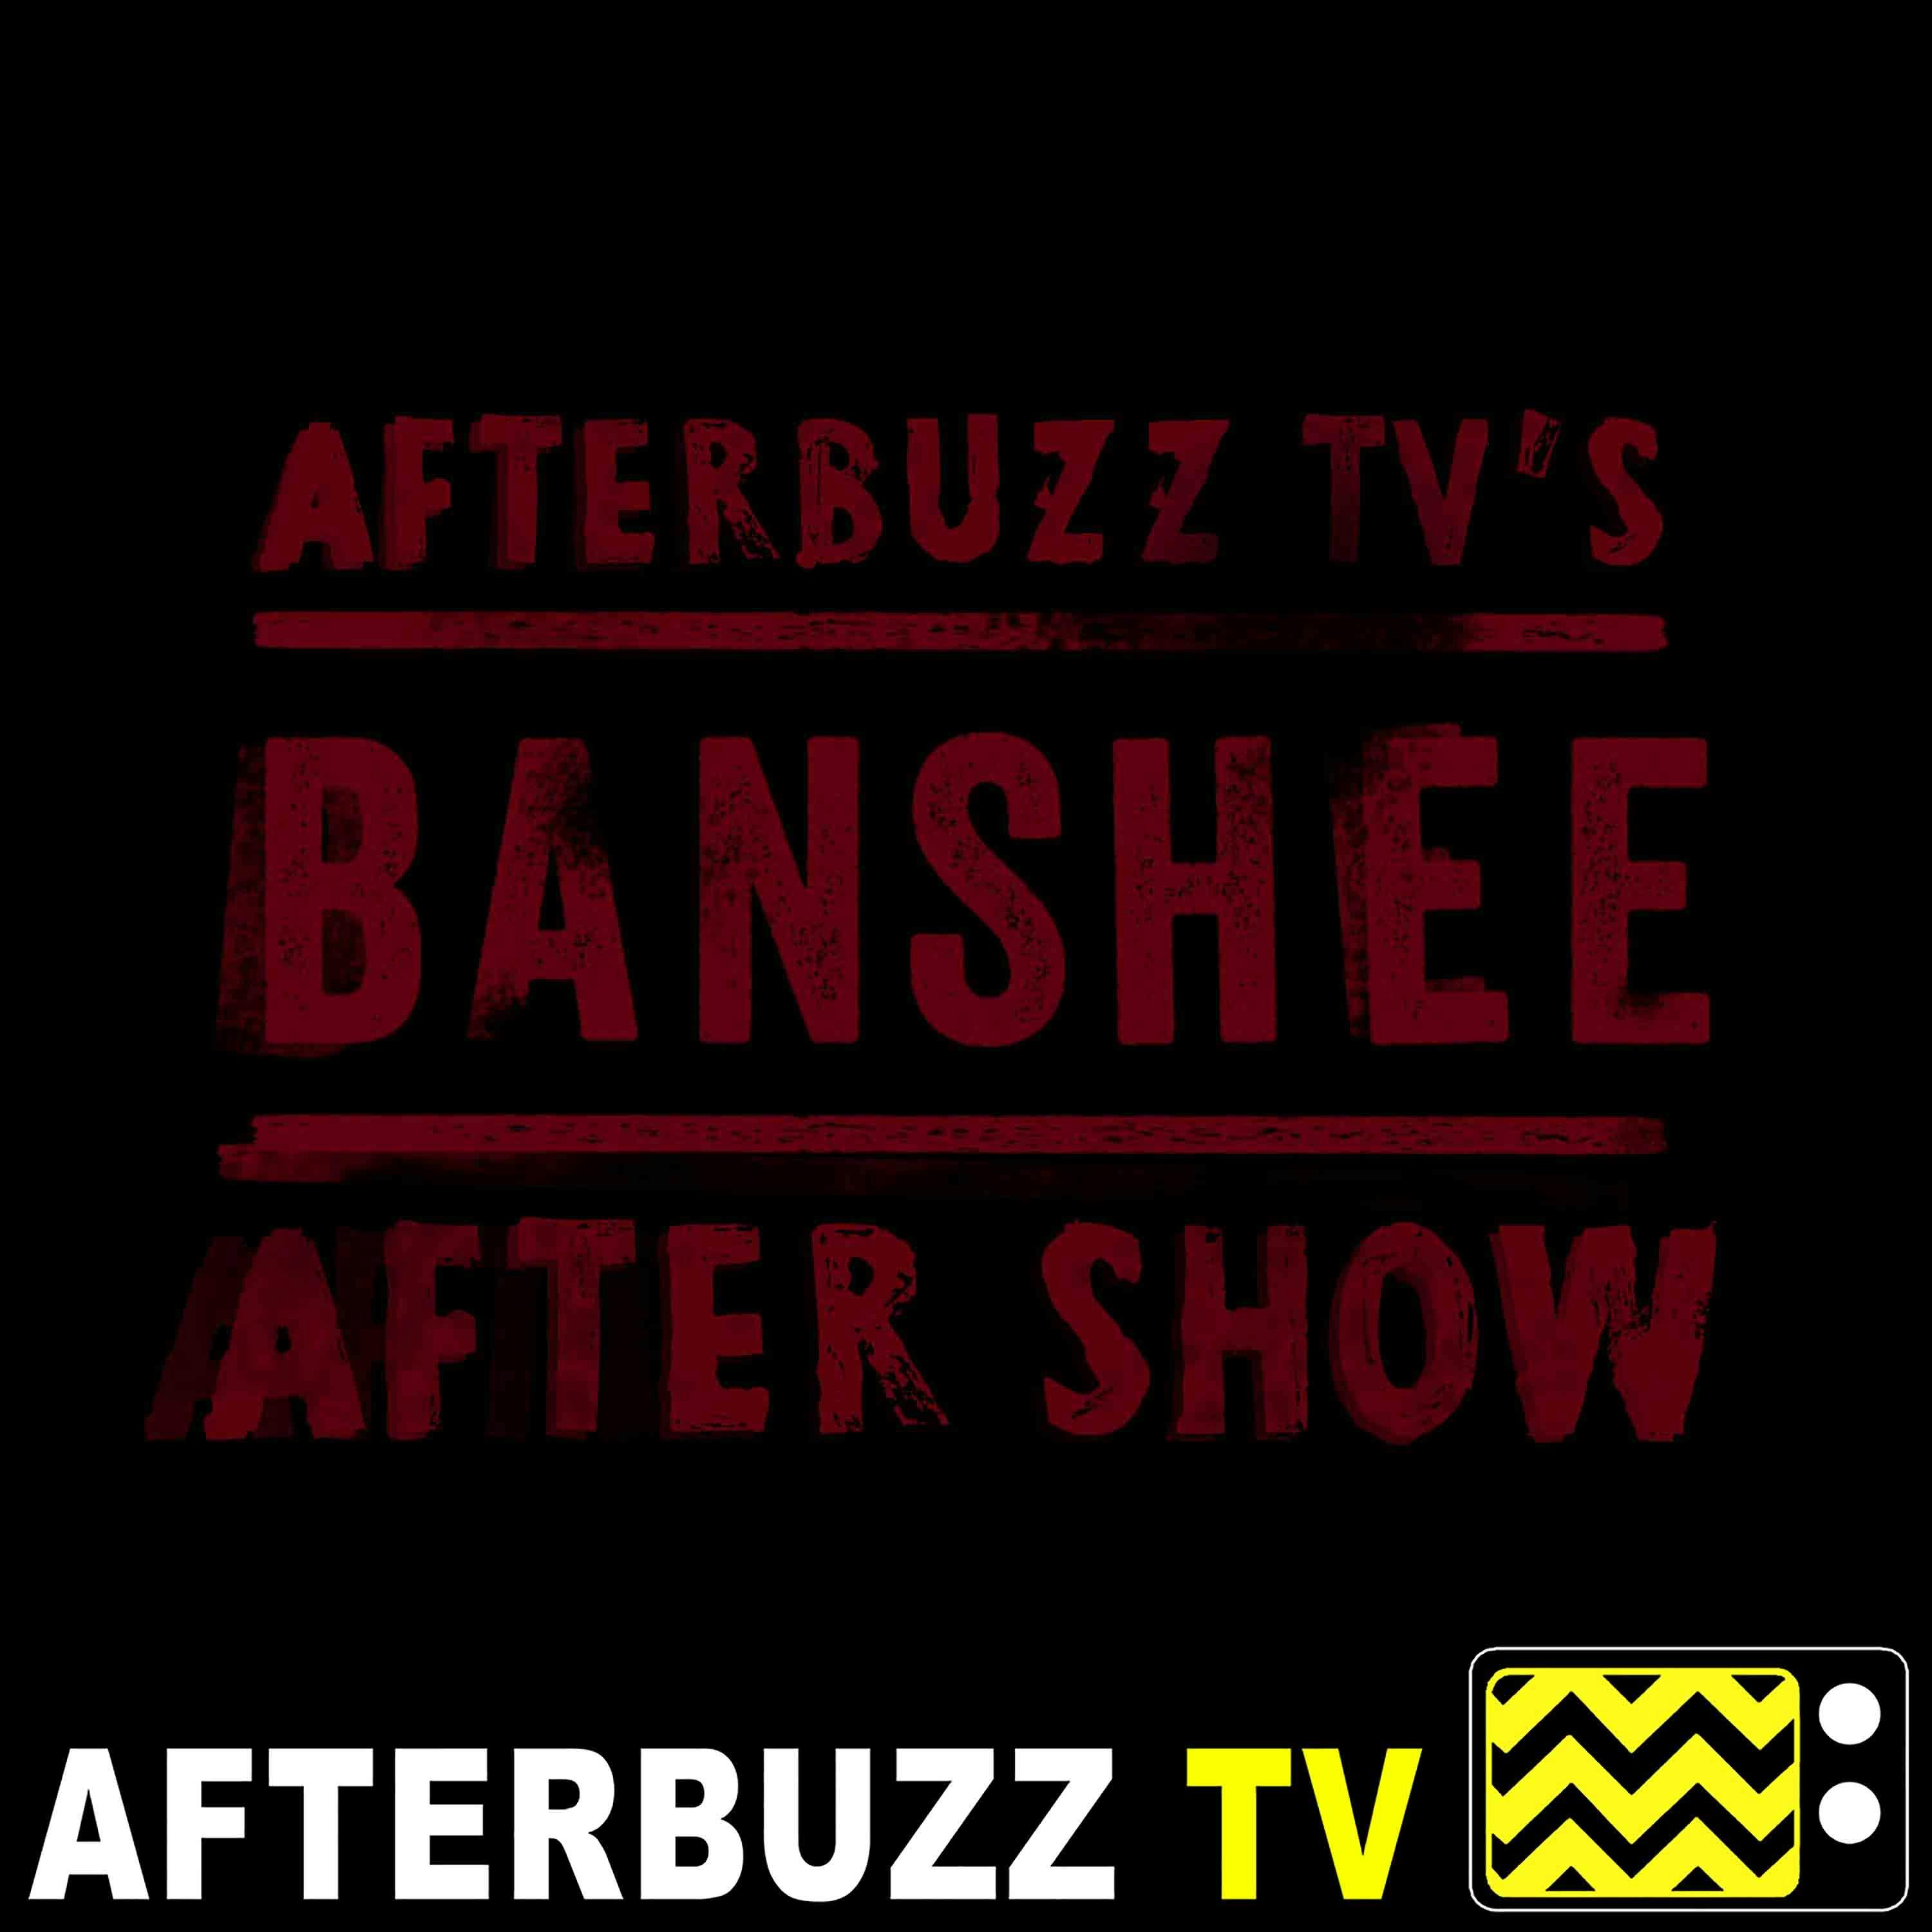 Banshee S:4 | Ivana Milicevic Guests on Innocent Might Be a Bit of a Stretch E:4 | AfterBuzz TV AfterShow